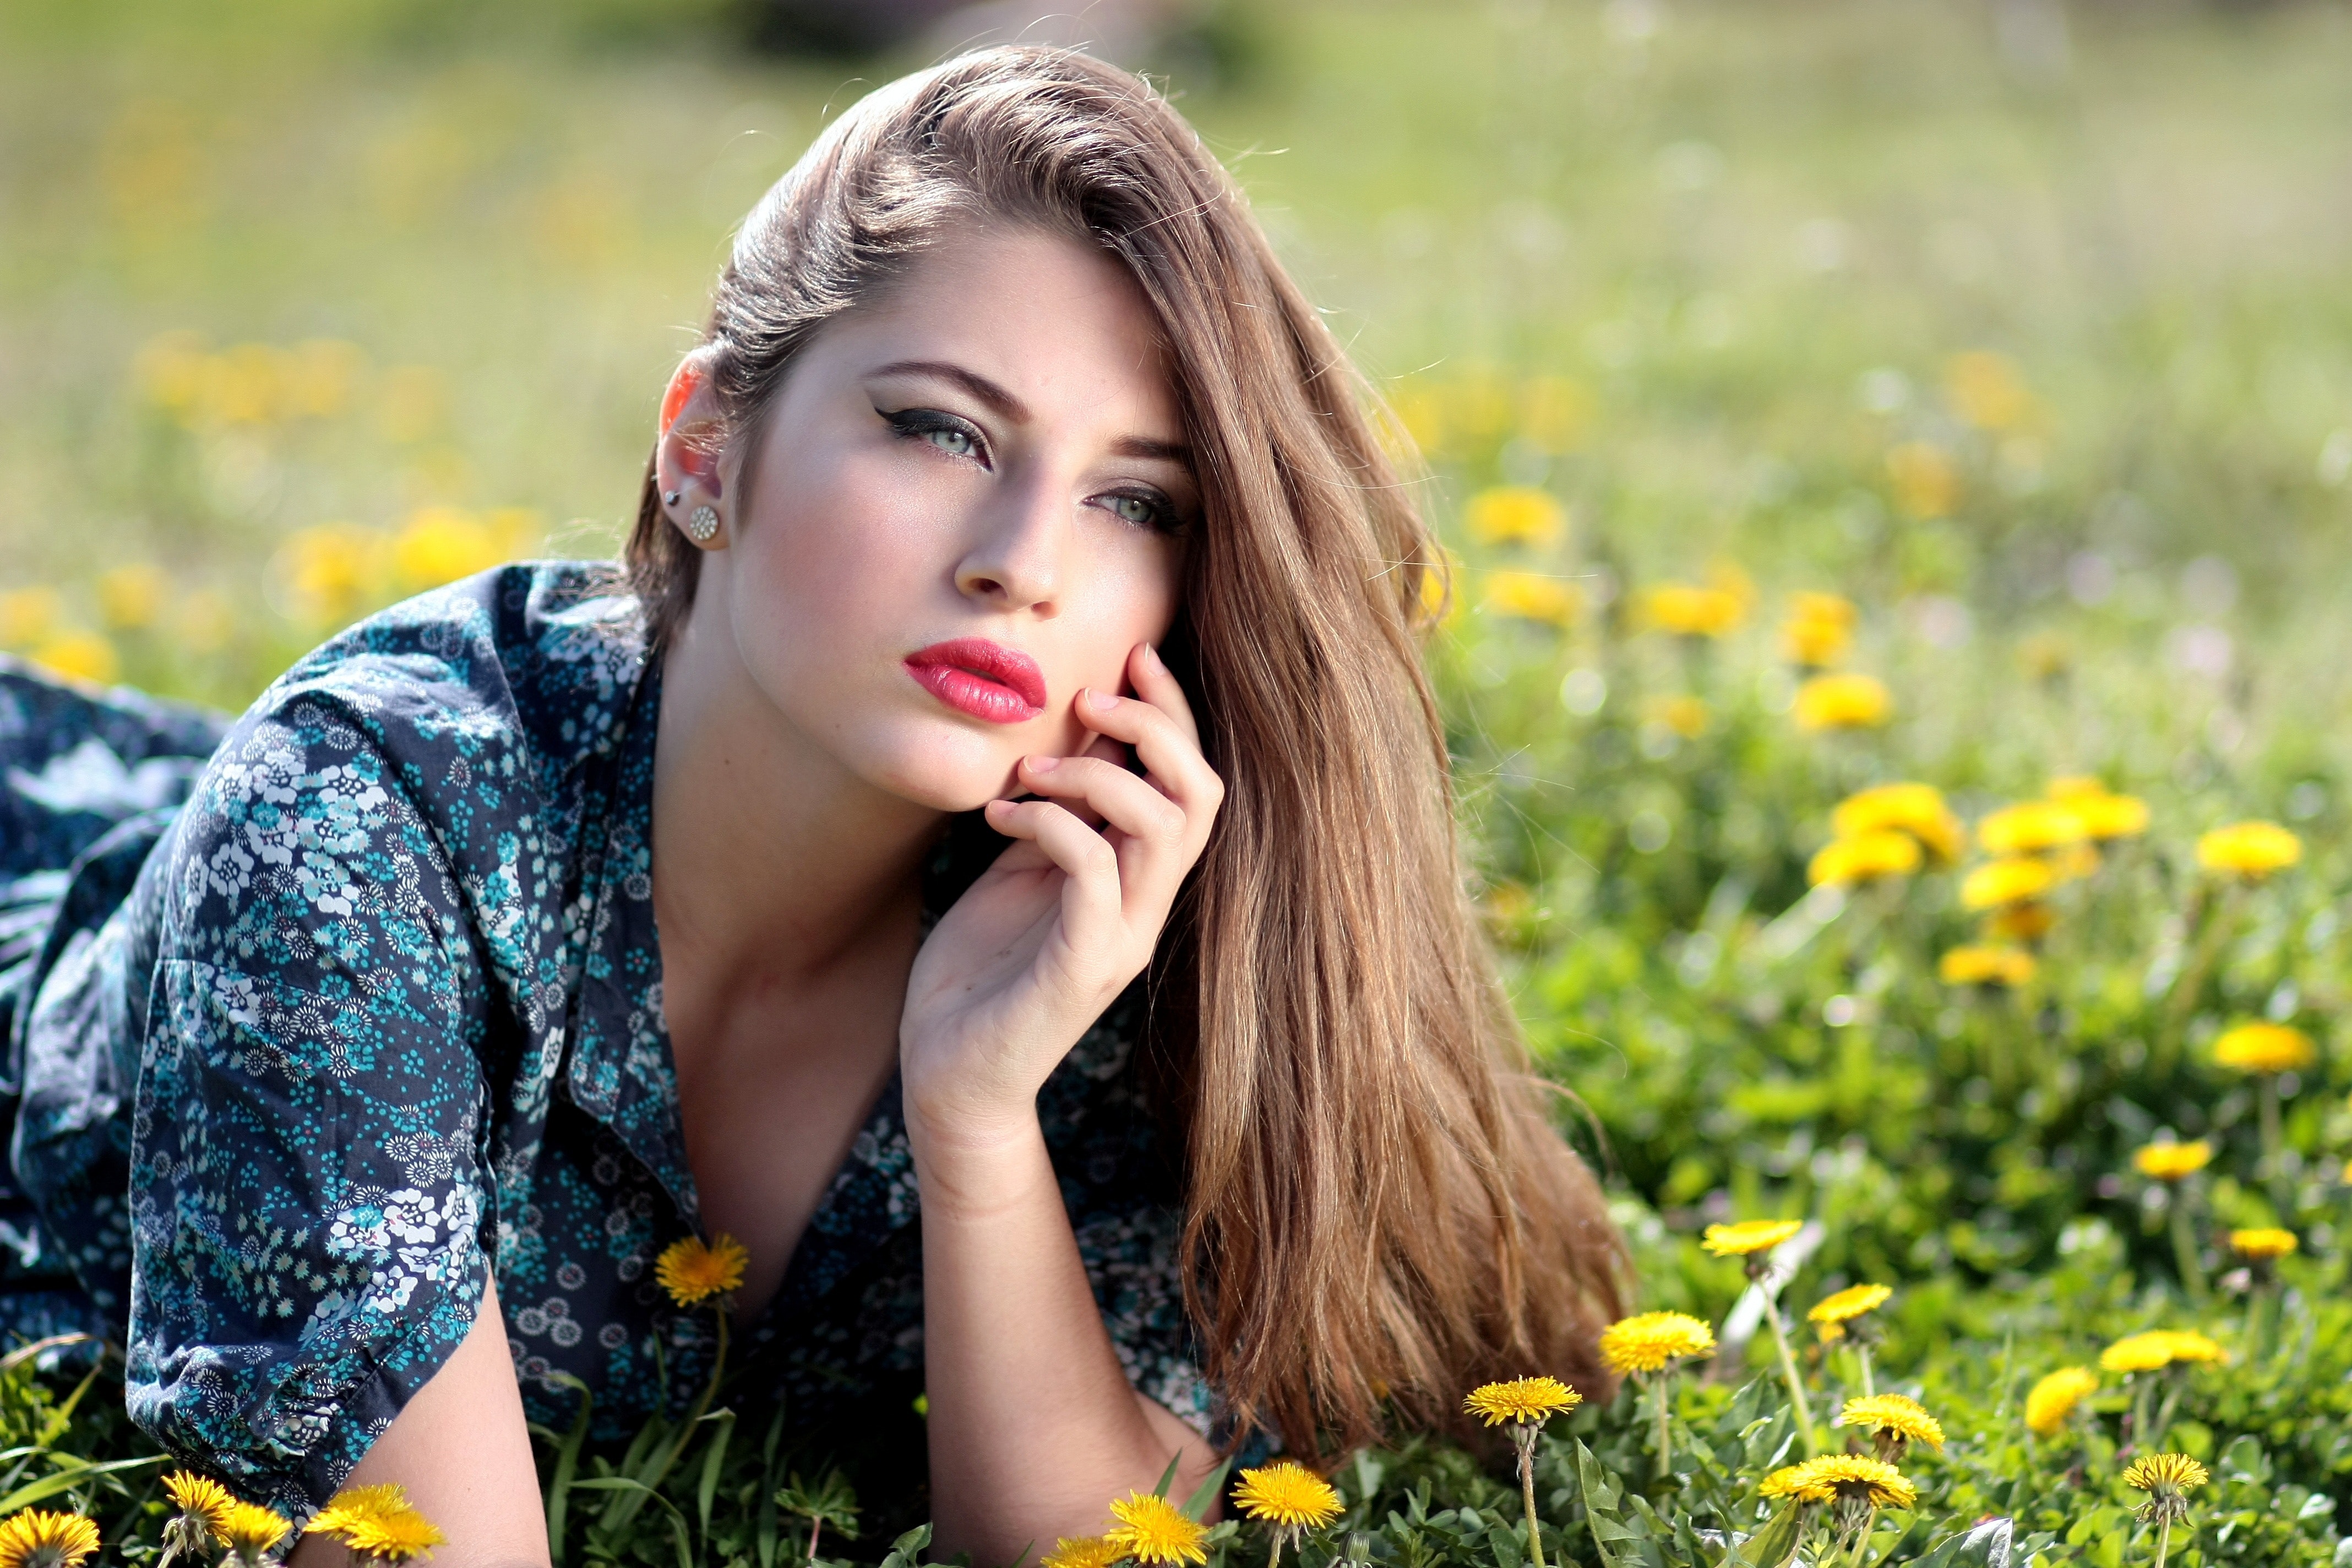 Girl lying on yellow flower field during daytime photo